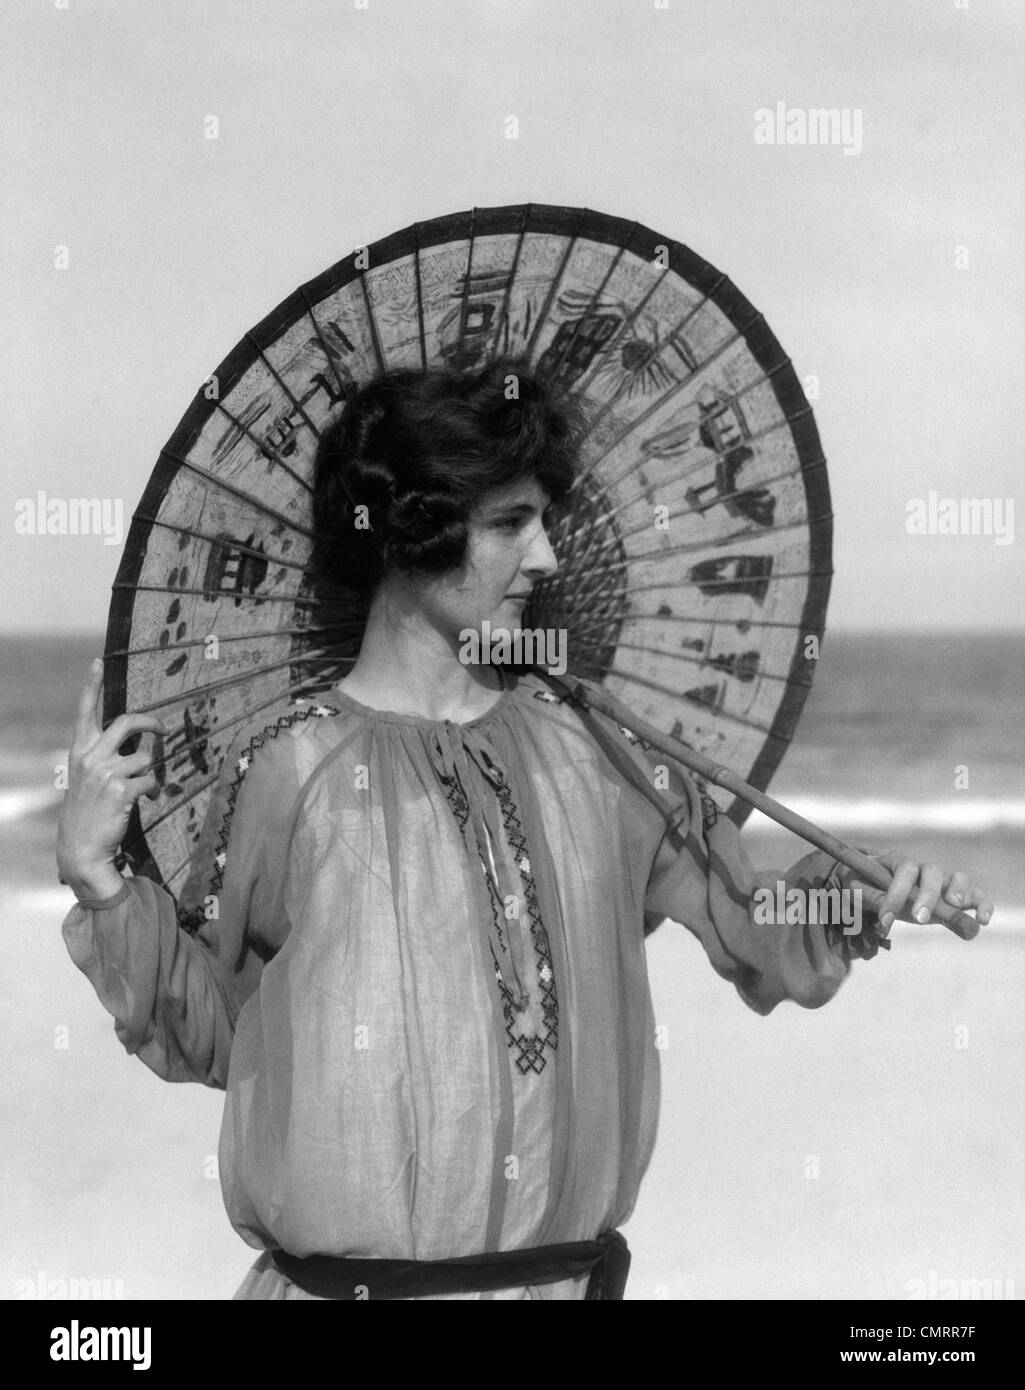 1920s WOMAN STANDING ON BEACH HOLDING ORIENTAL UMBRELLA LOOKING OFF TO SIDE Stock Photo